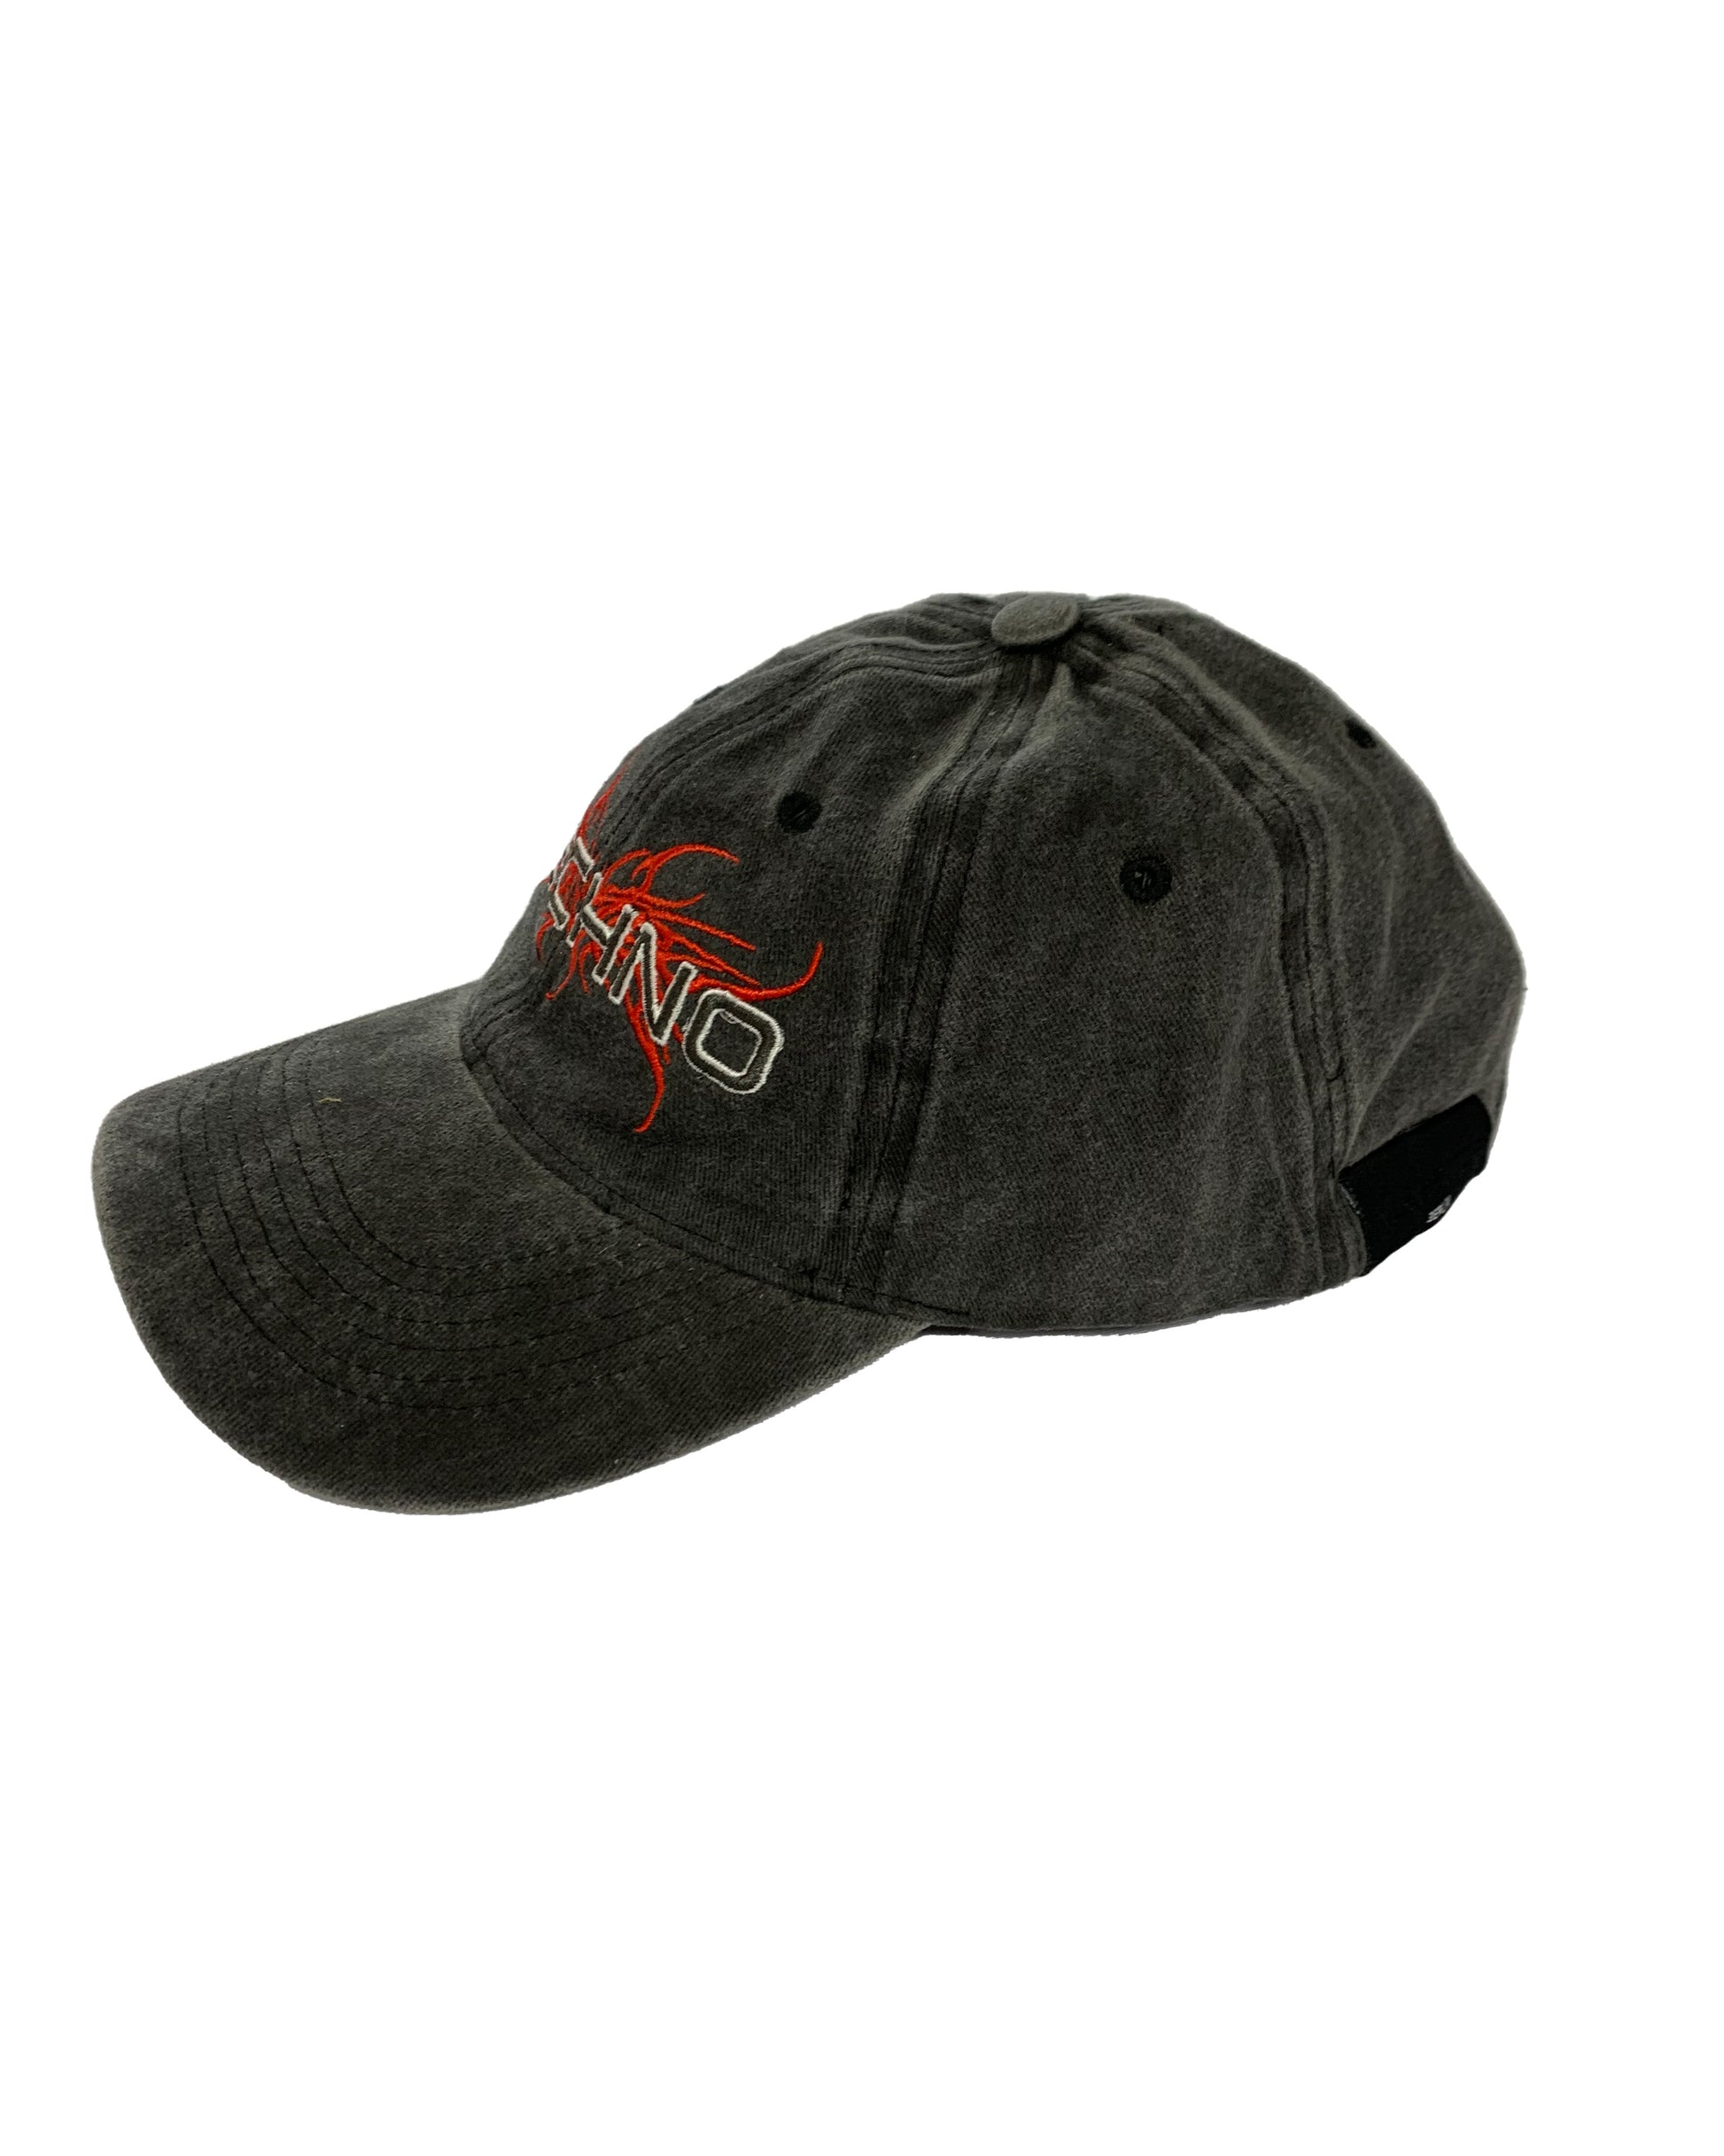 Acid washed black cap embrodery techno and tribal This bold cap is the perfect accessory to make a statement. Its acid-washed black base exudes a stylish, contemporary vibe while the embroidered TECHNO and tribal designs bring a rave touch